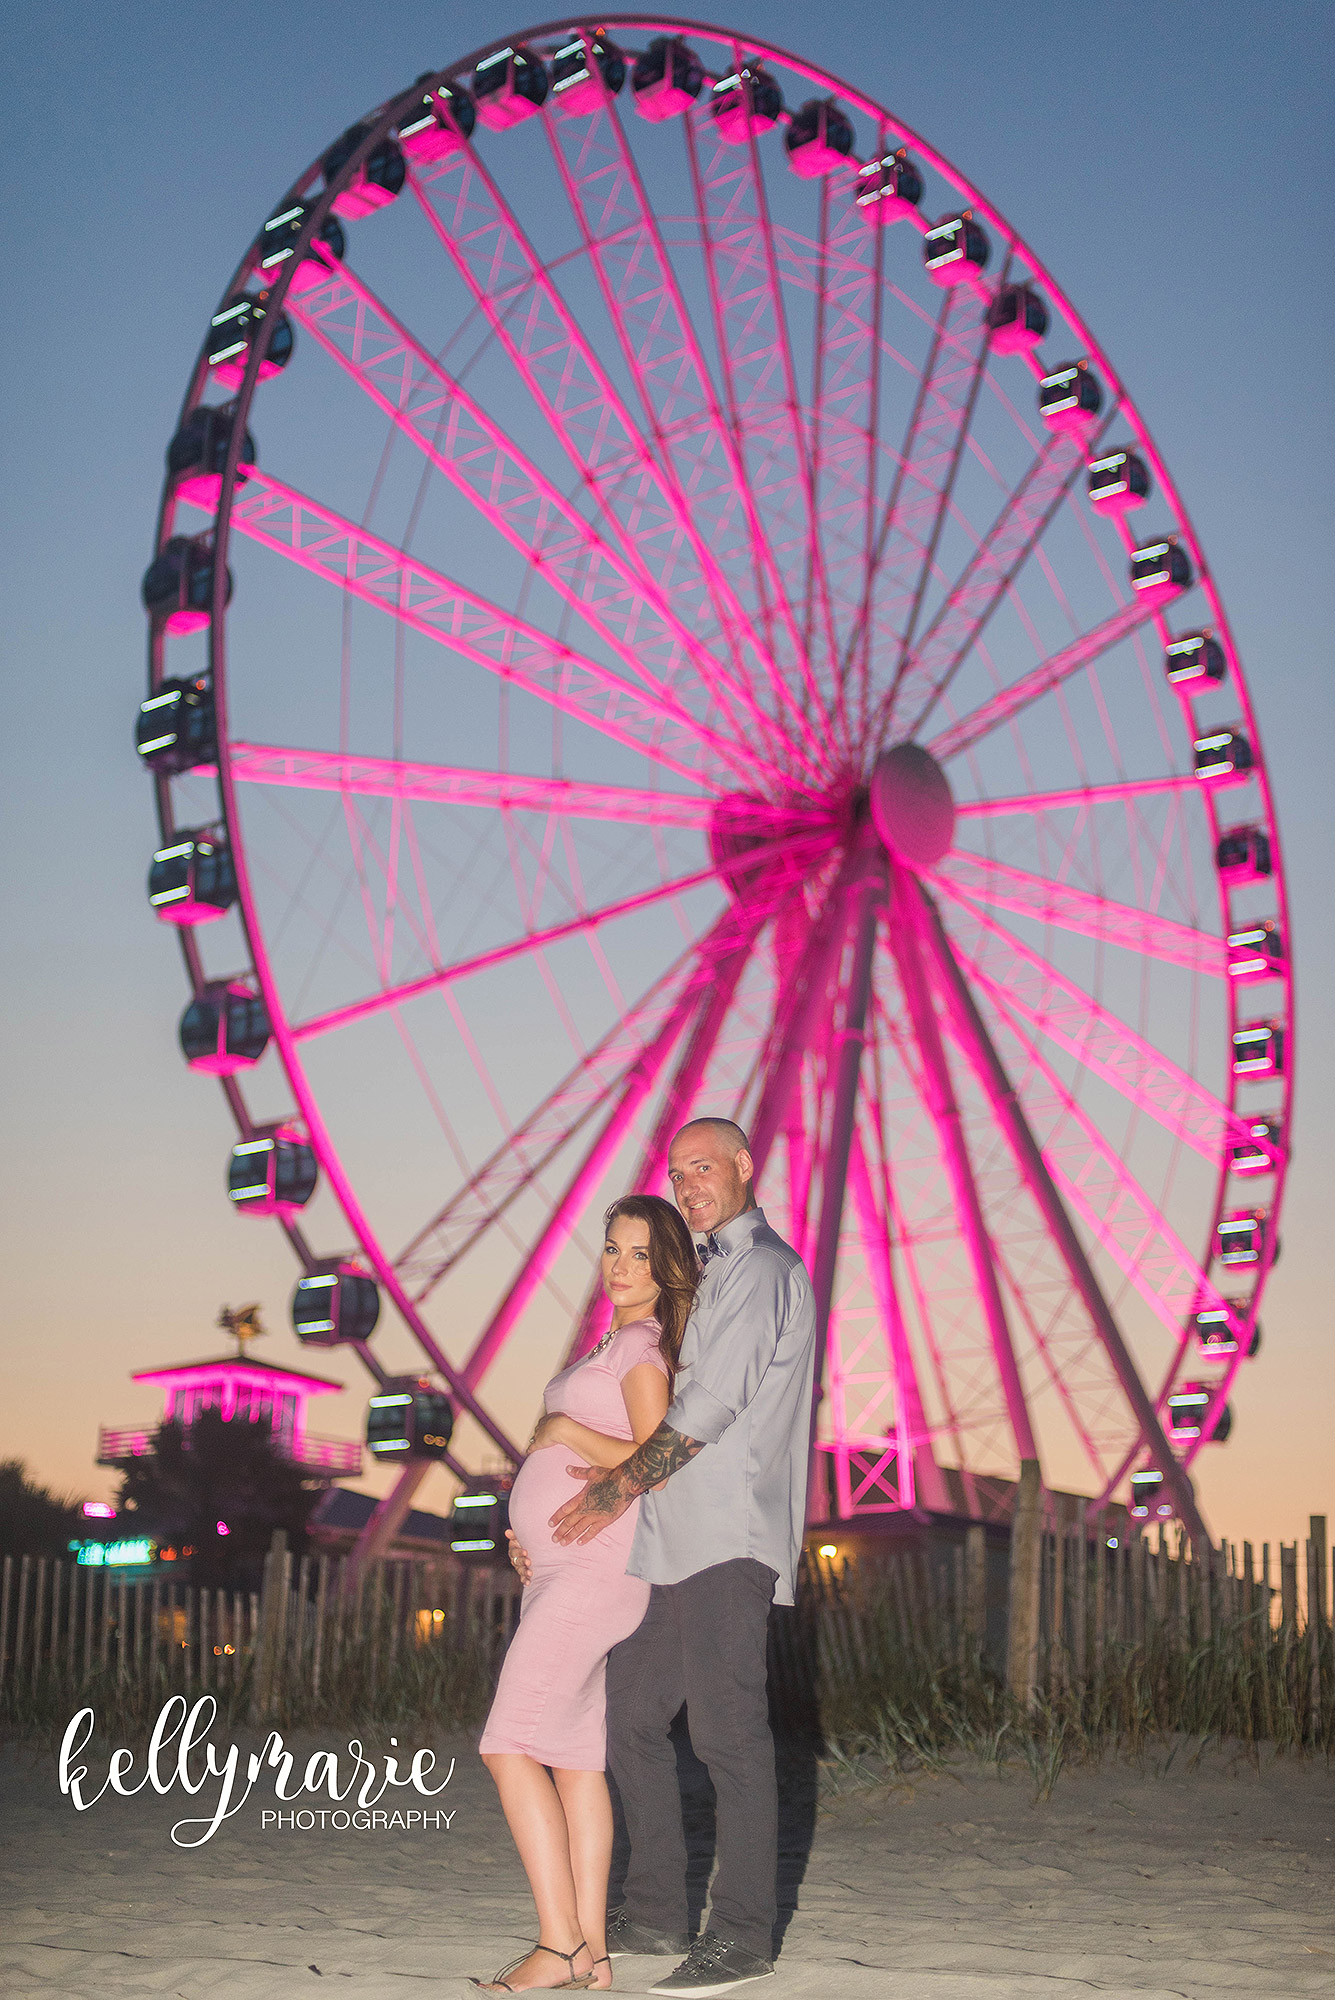 Expectant Dad Uses Ferris Wheel for Gender Reveal | PEOPLE.com